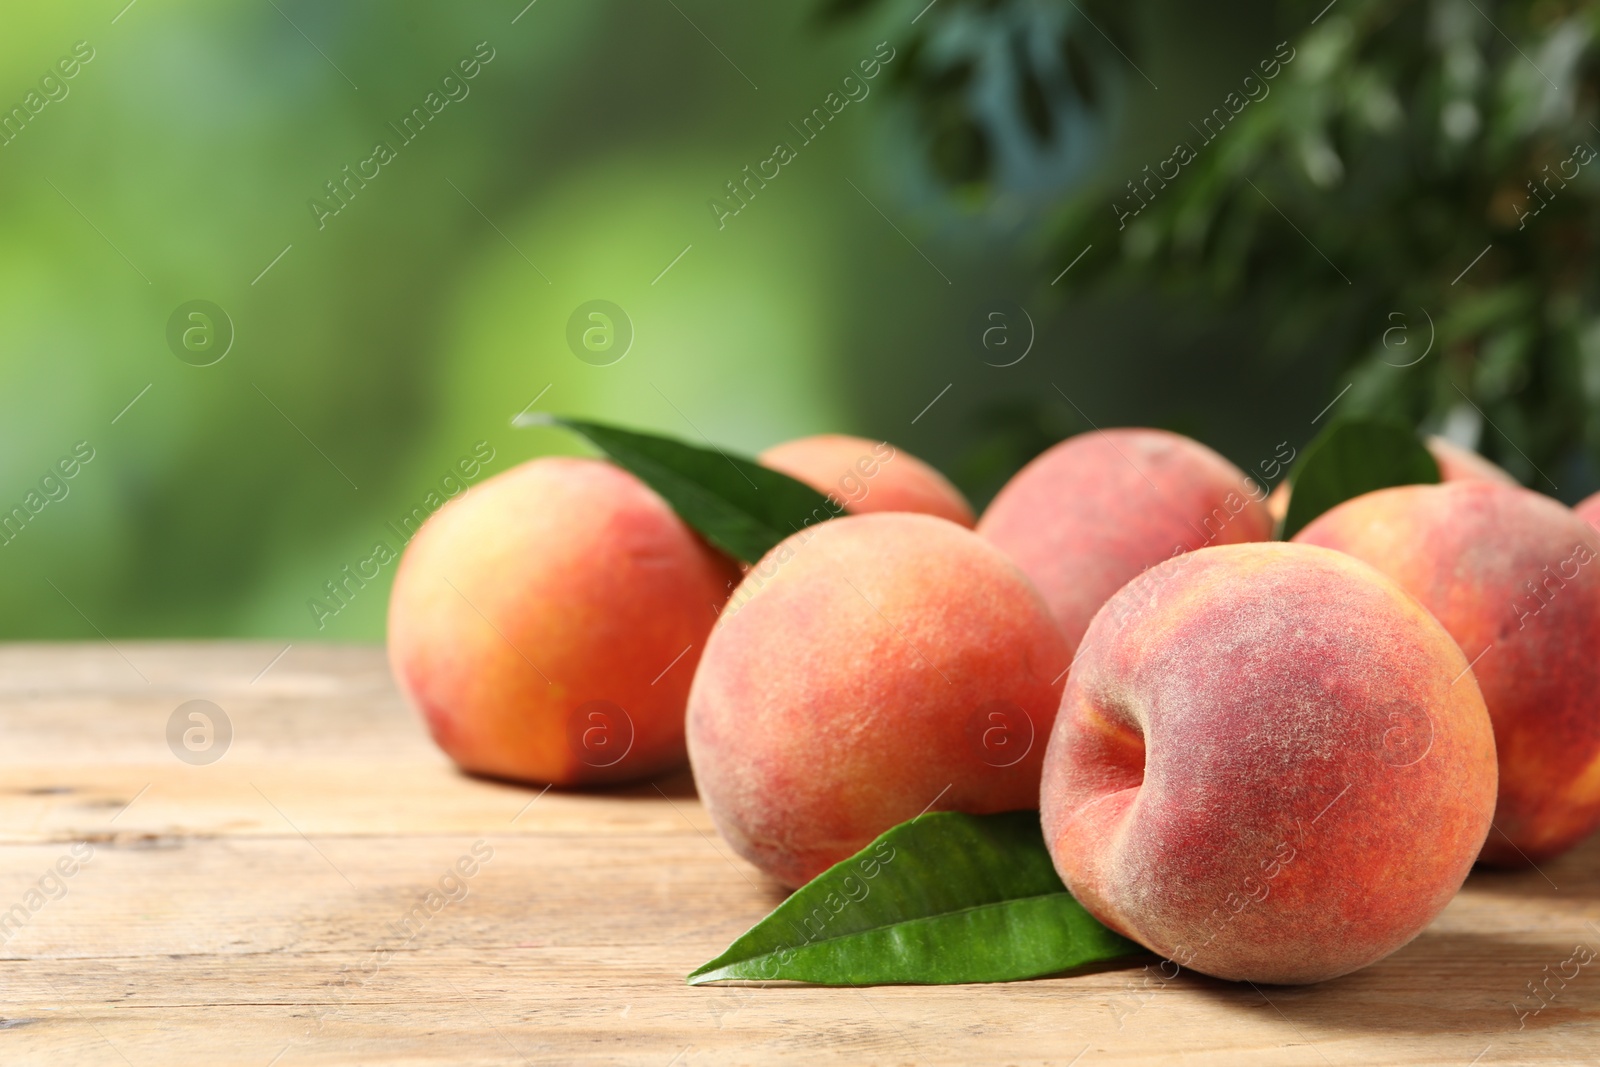 Photo of Many whole fresh ripe peaches and green leaves on wooden table against blurred background, closeup. Space for text